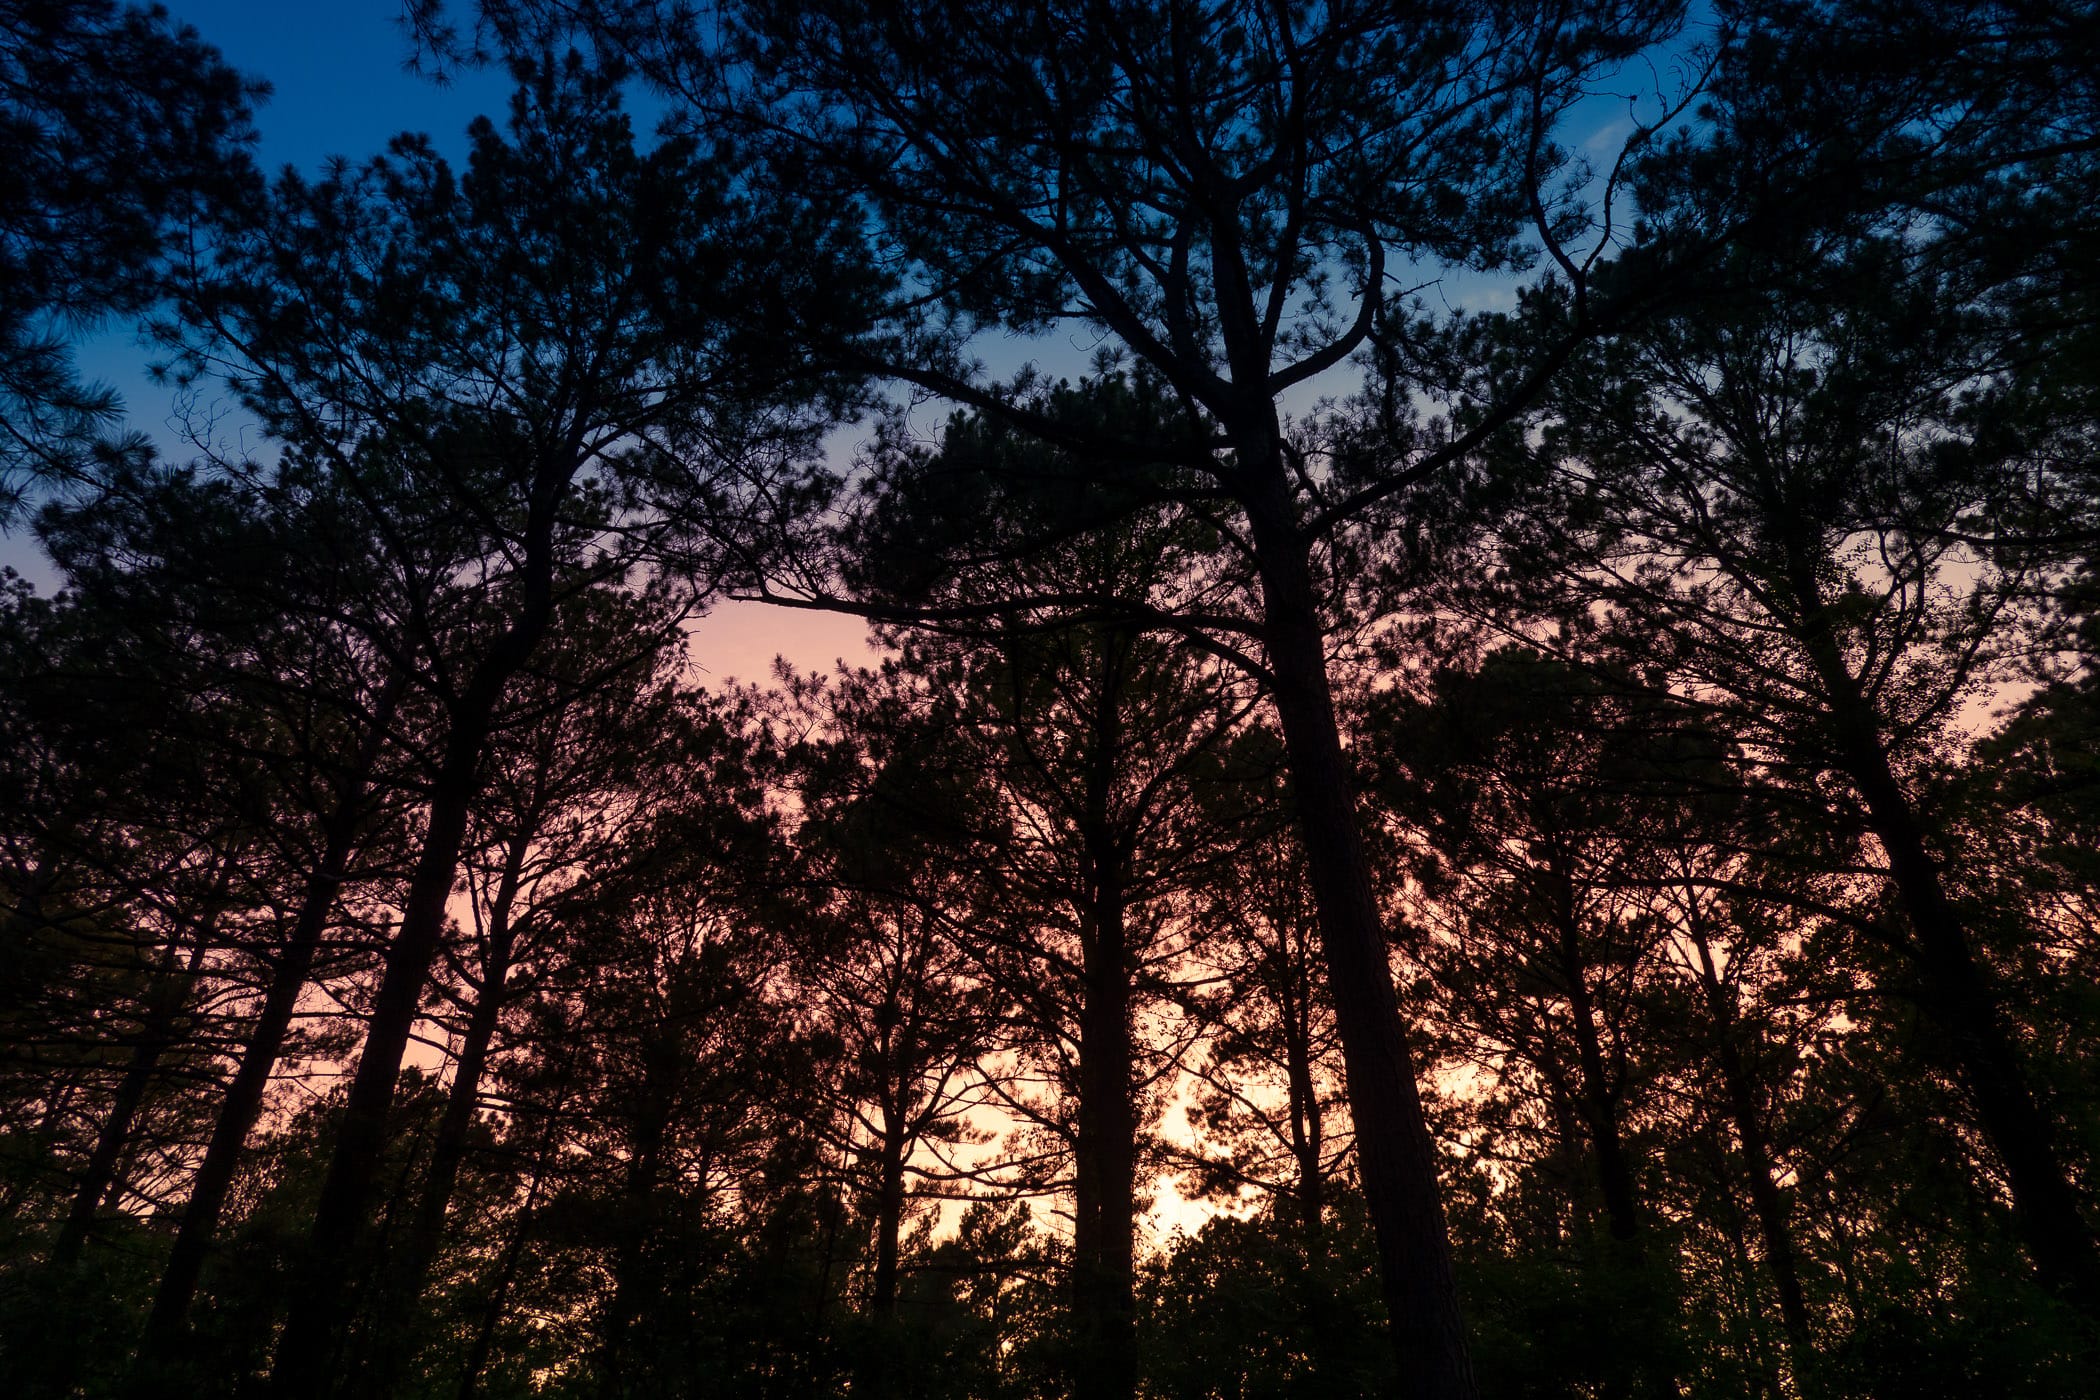 The sun sets on the pine forest near Hochatown, Oklahoma.